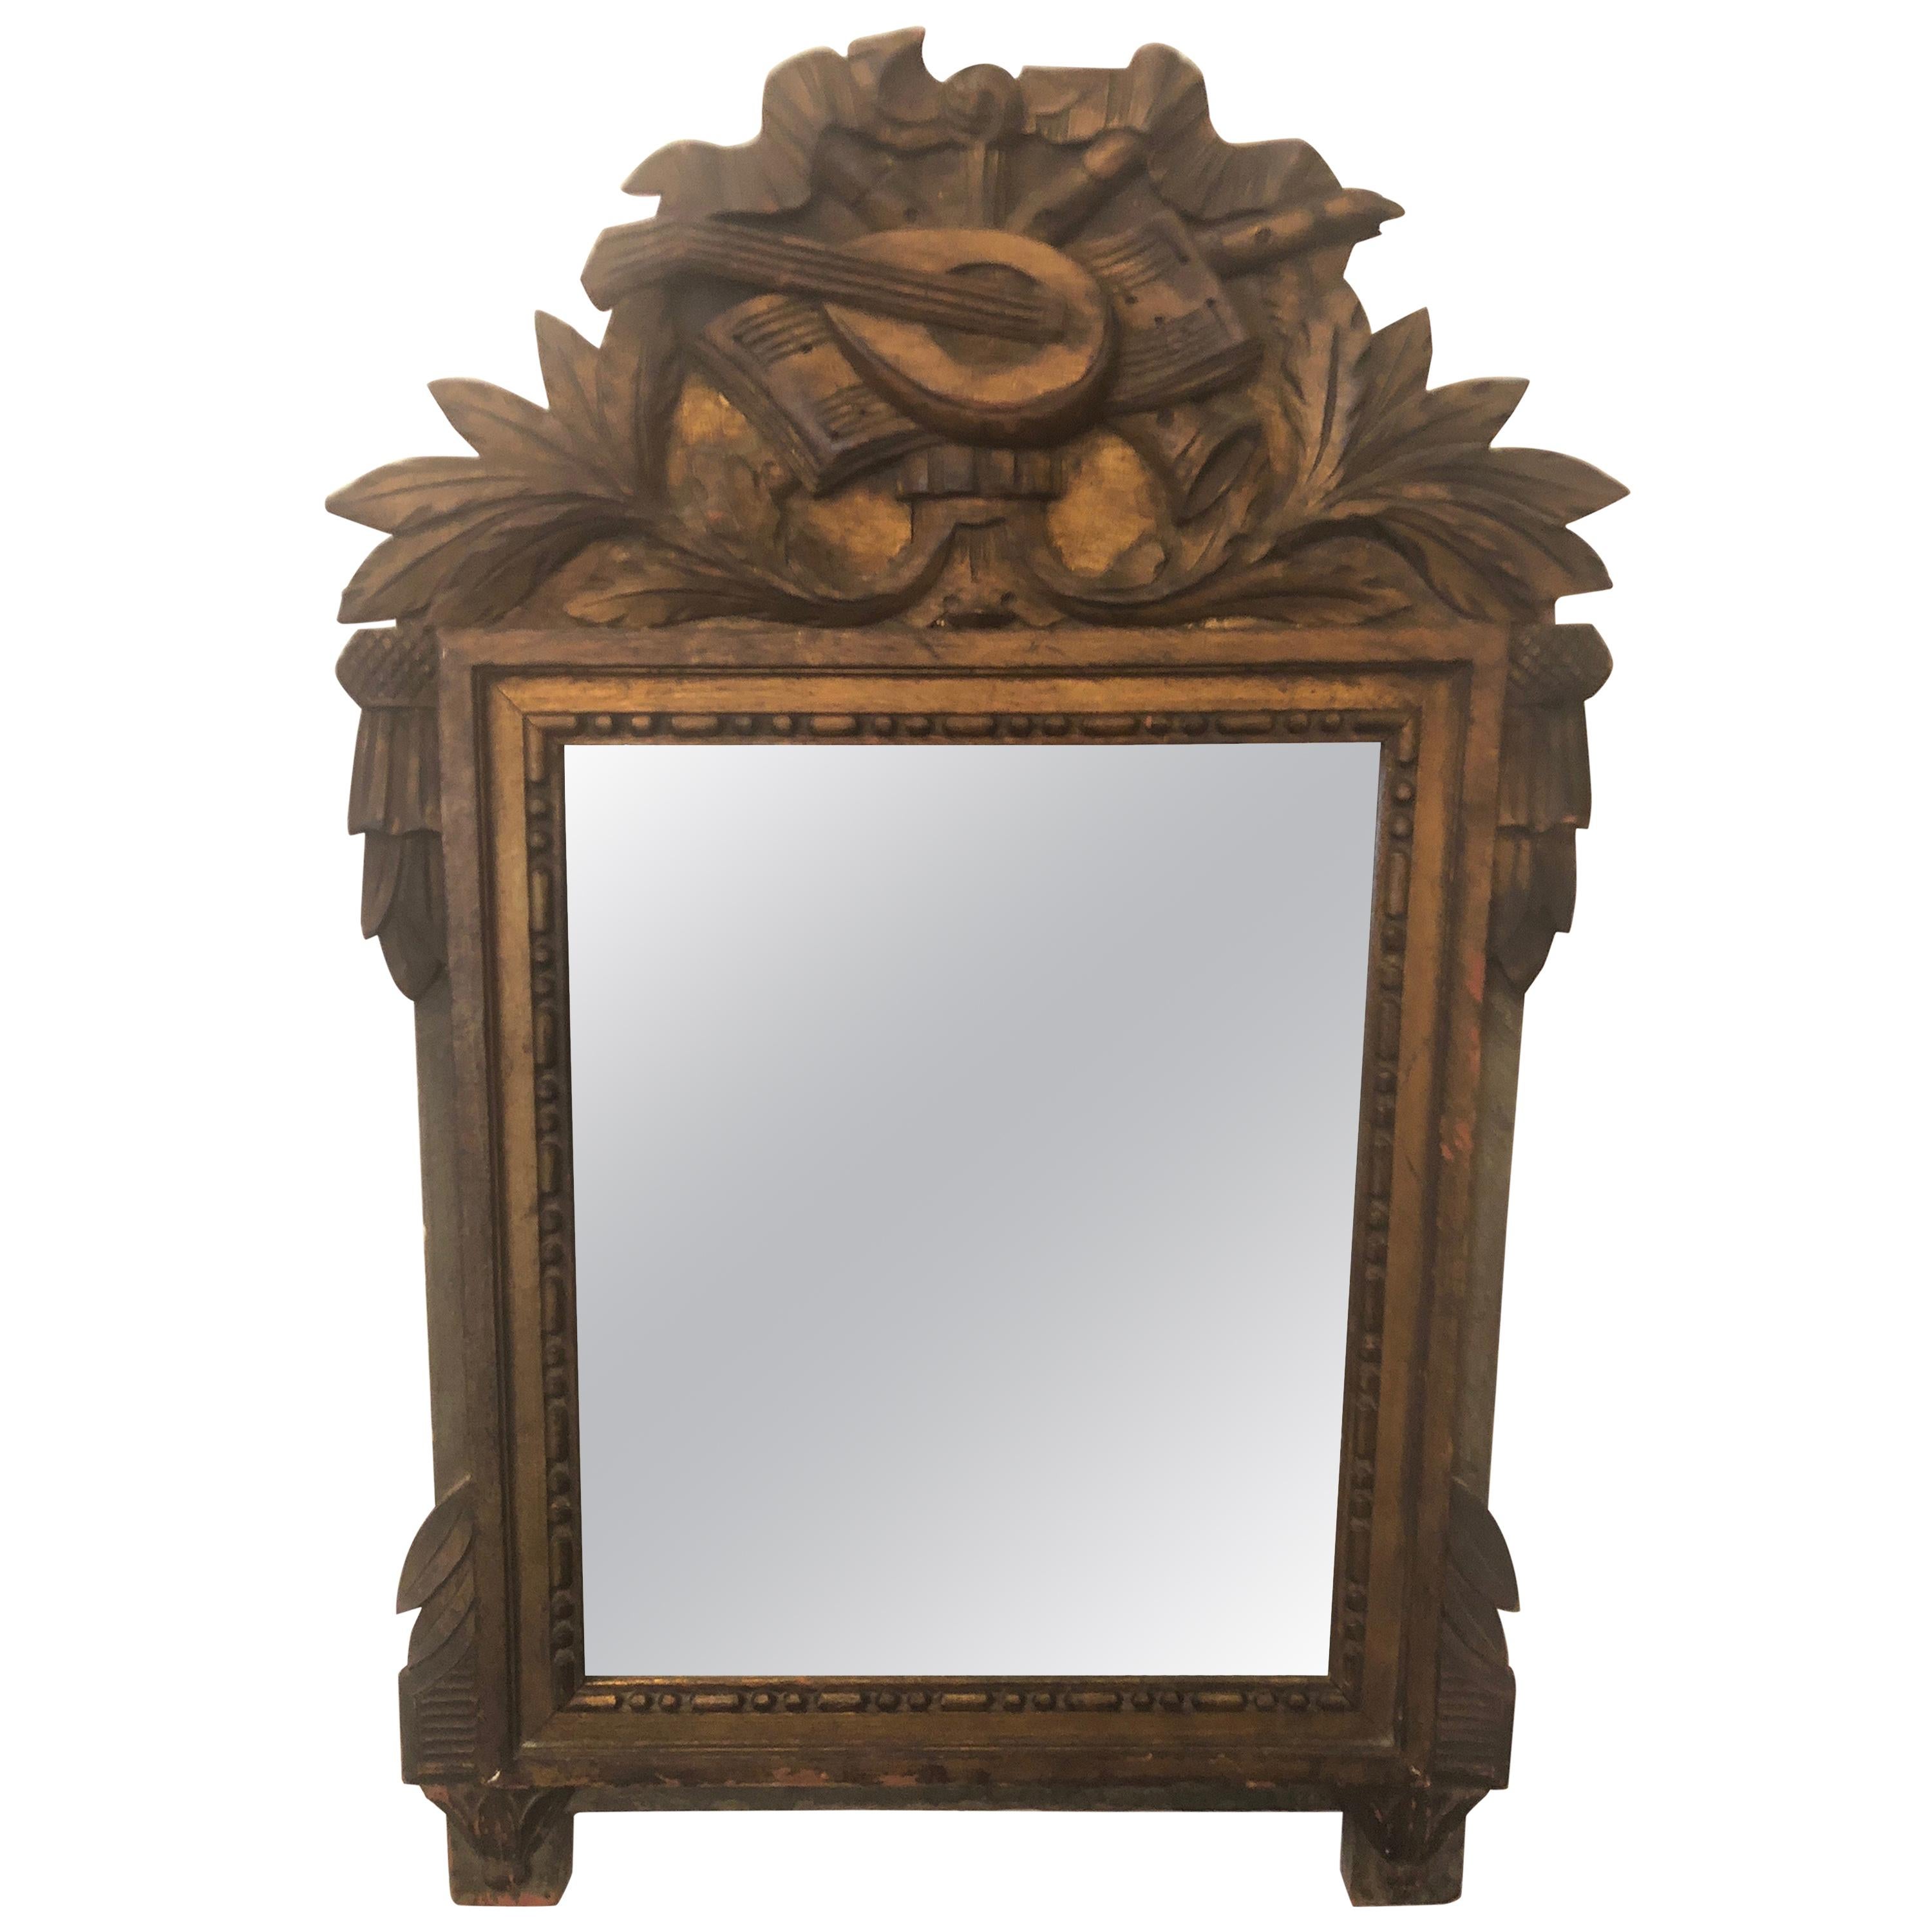 19th Century Neoclassical Carved Giltwood Mirror with Mandolin